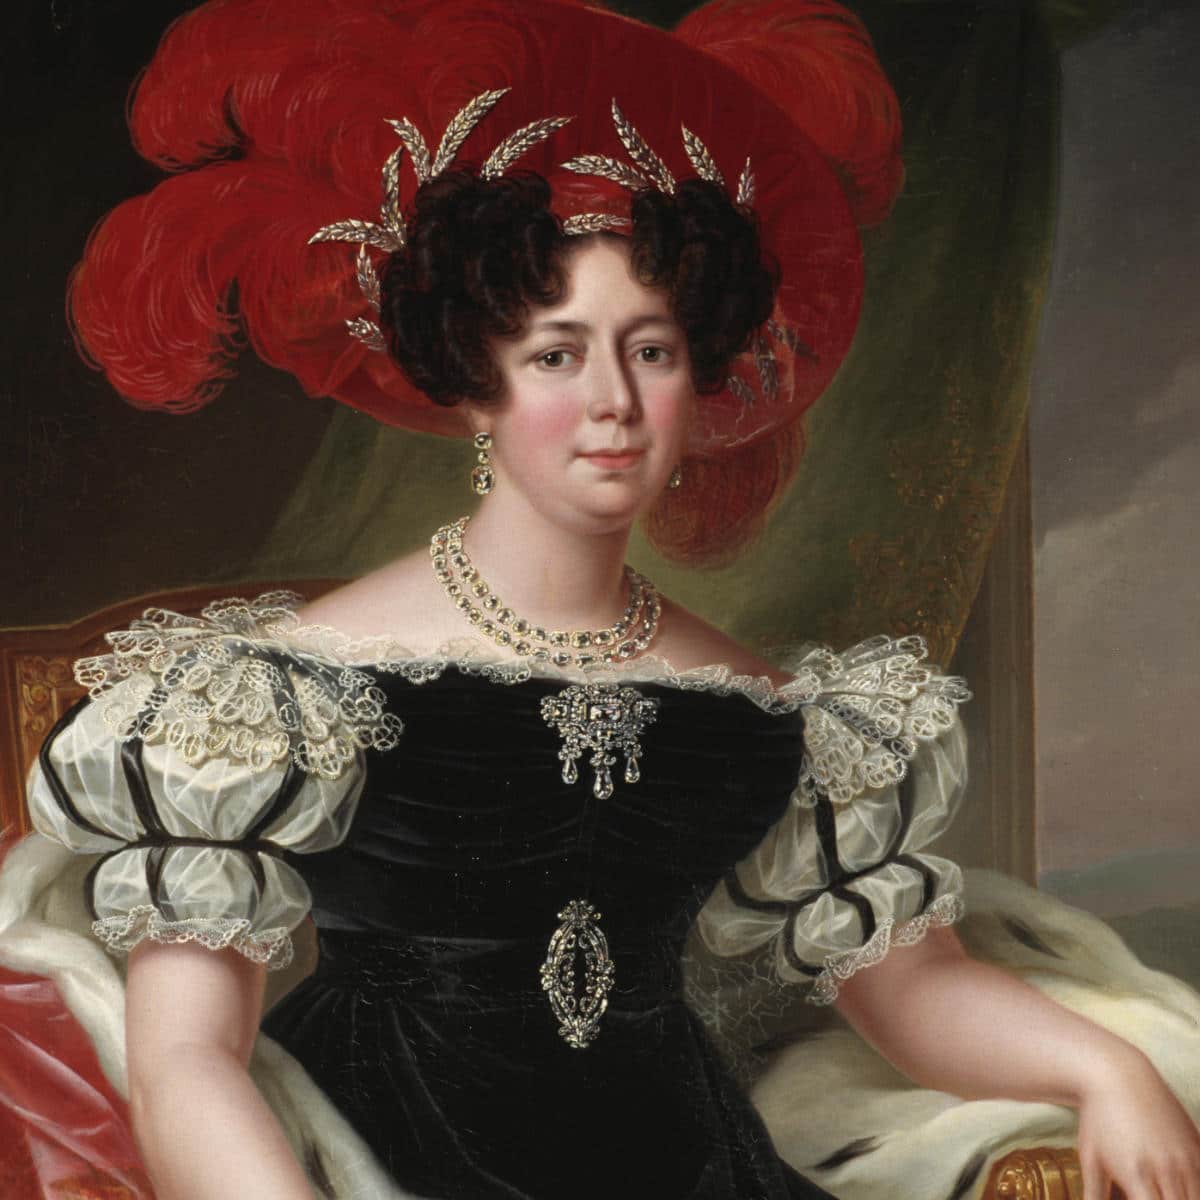 You are currently viewing Désirée Clary: From Napoleon’s spurned fiancée to Queen of Sweden